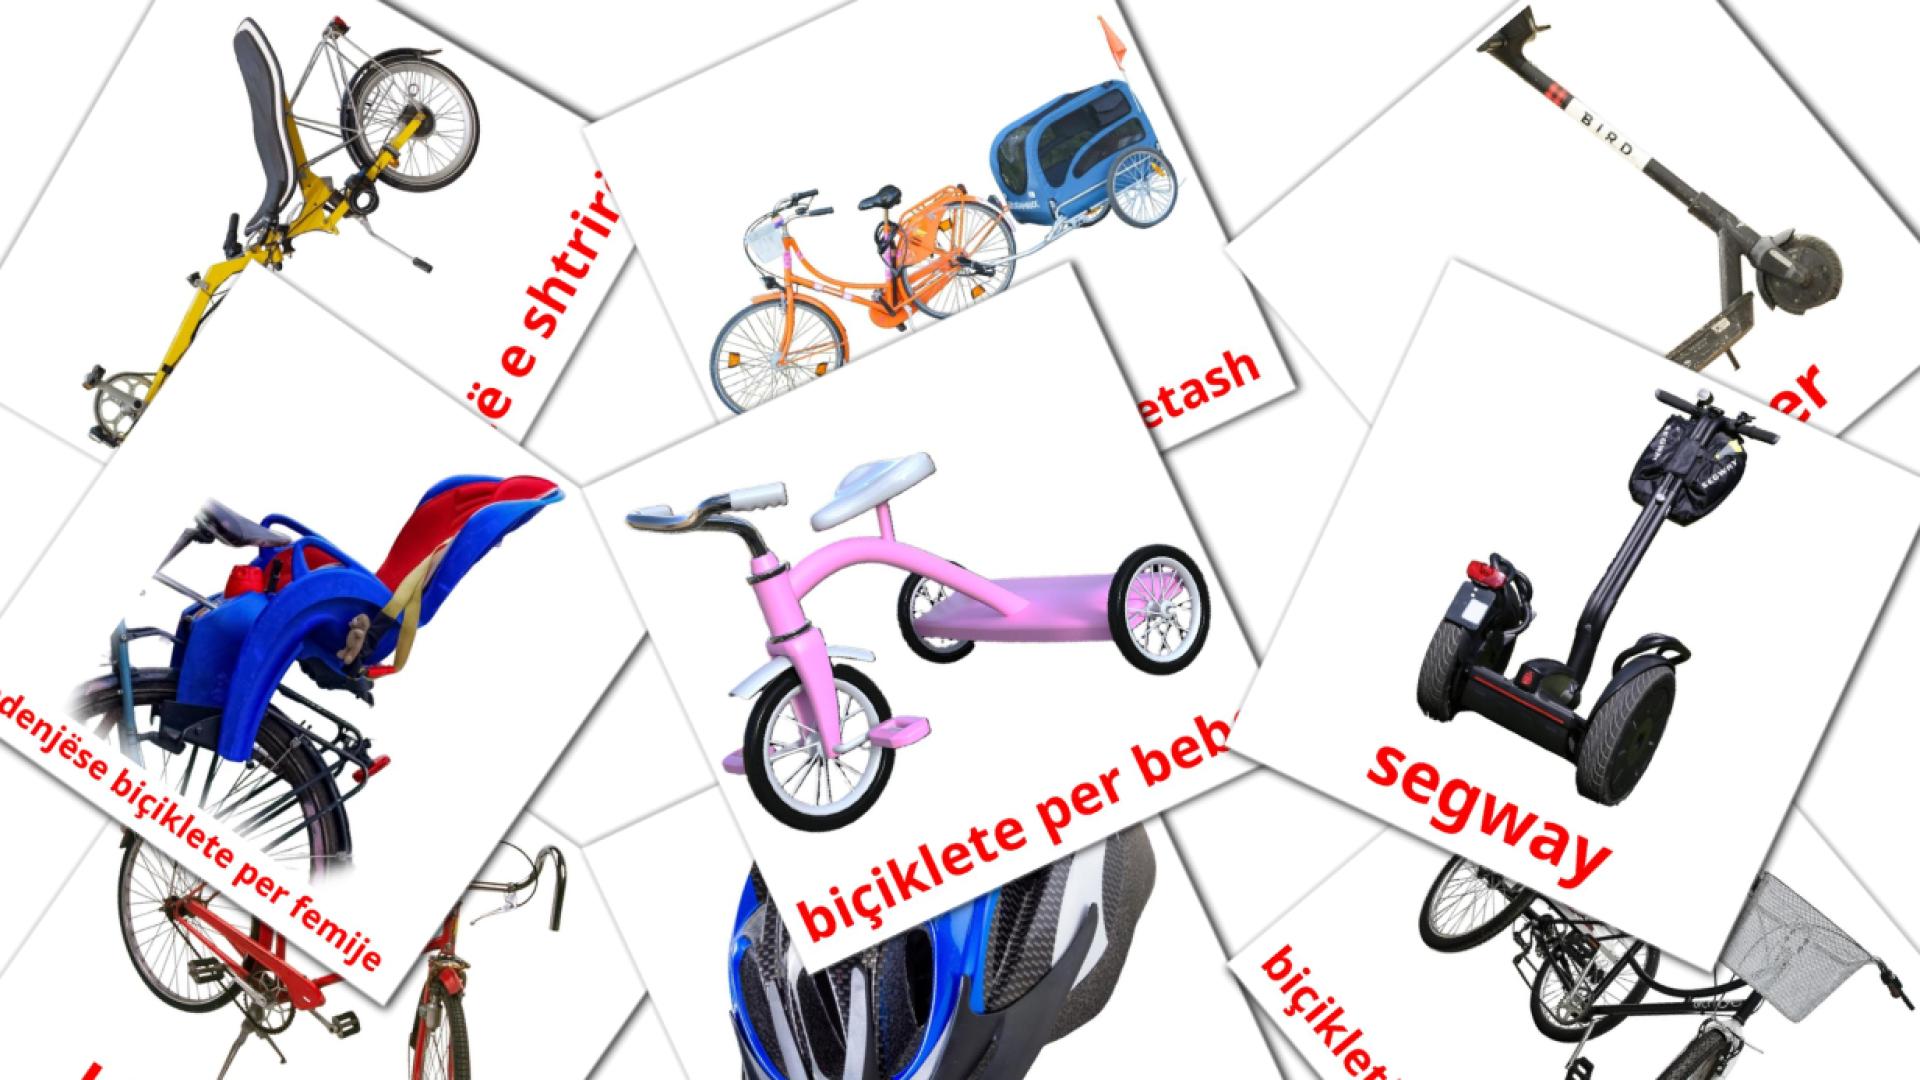 Bicycle transport - albanian vocabulary cards